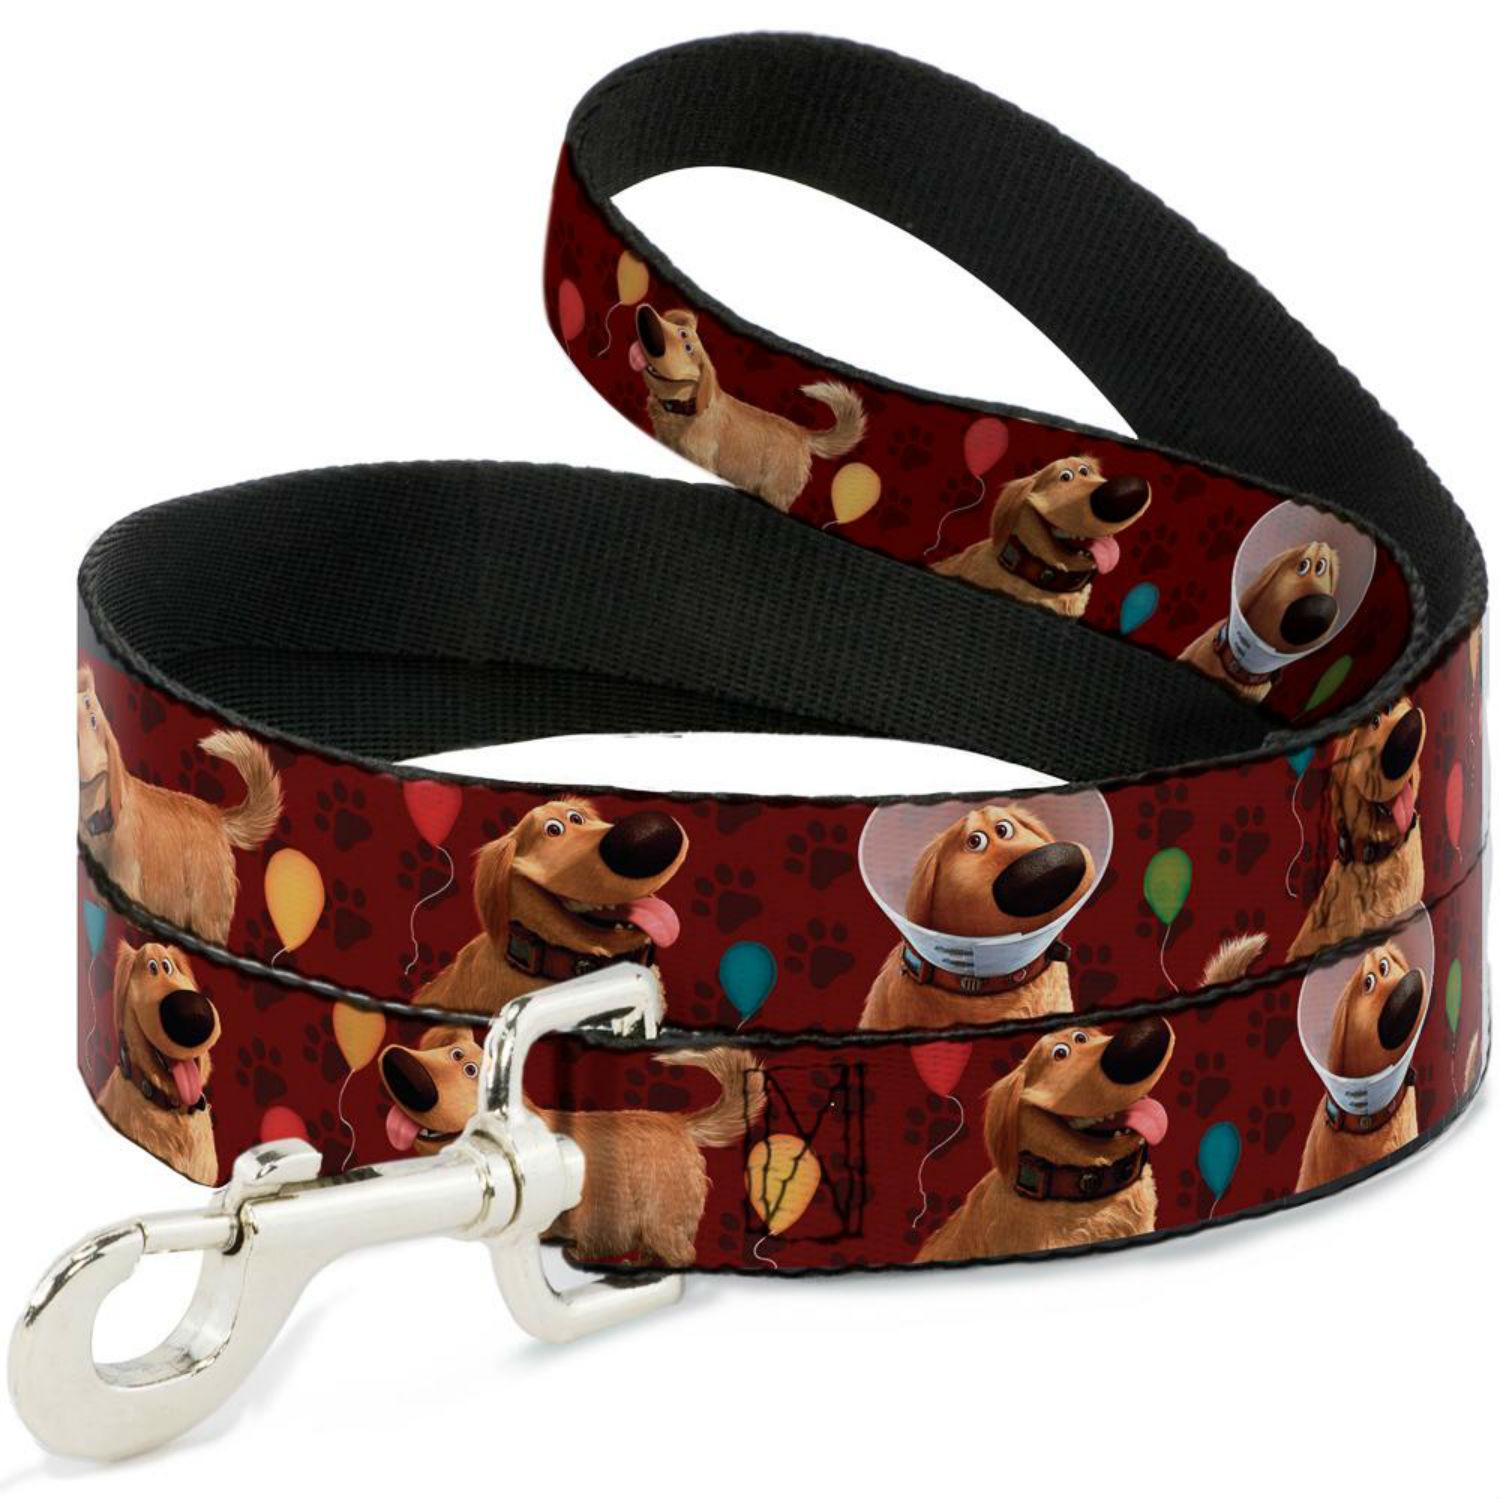 Dug with Balloons Dog Leash by Buckle-Down